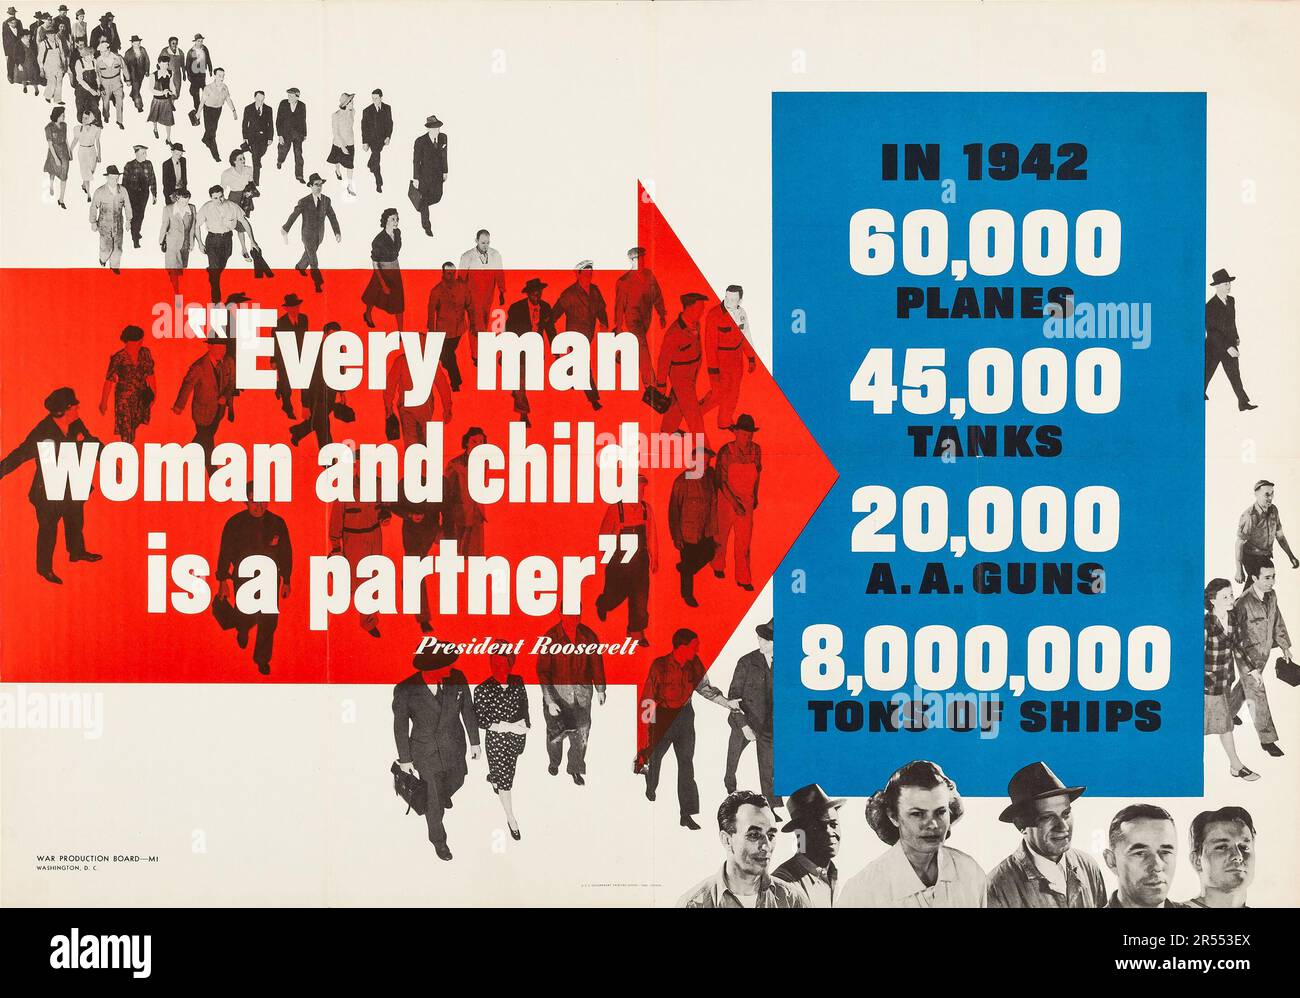 Every man woman and child is a partner - American World War II Propaganda (U.S. Government Printing Office, 1942) War Production Board Poster Stock Photo